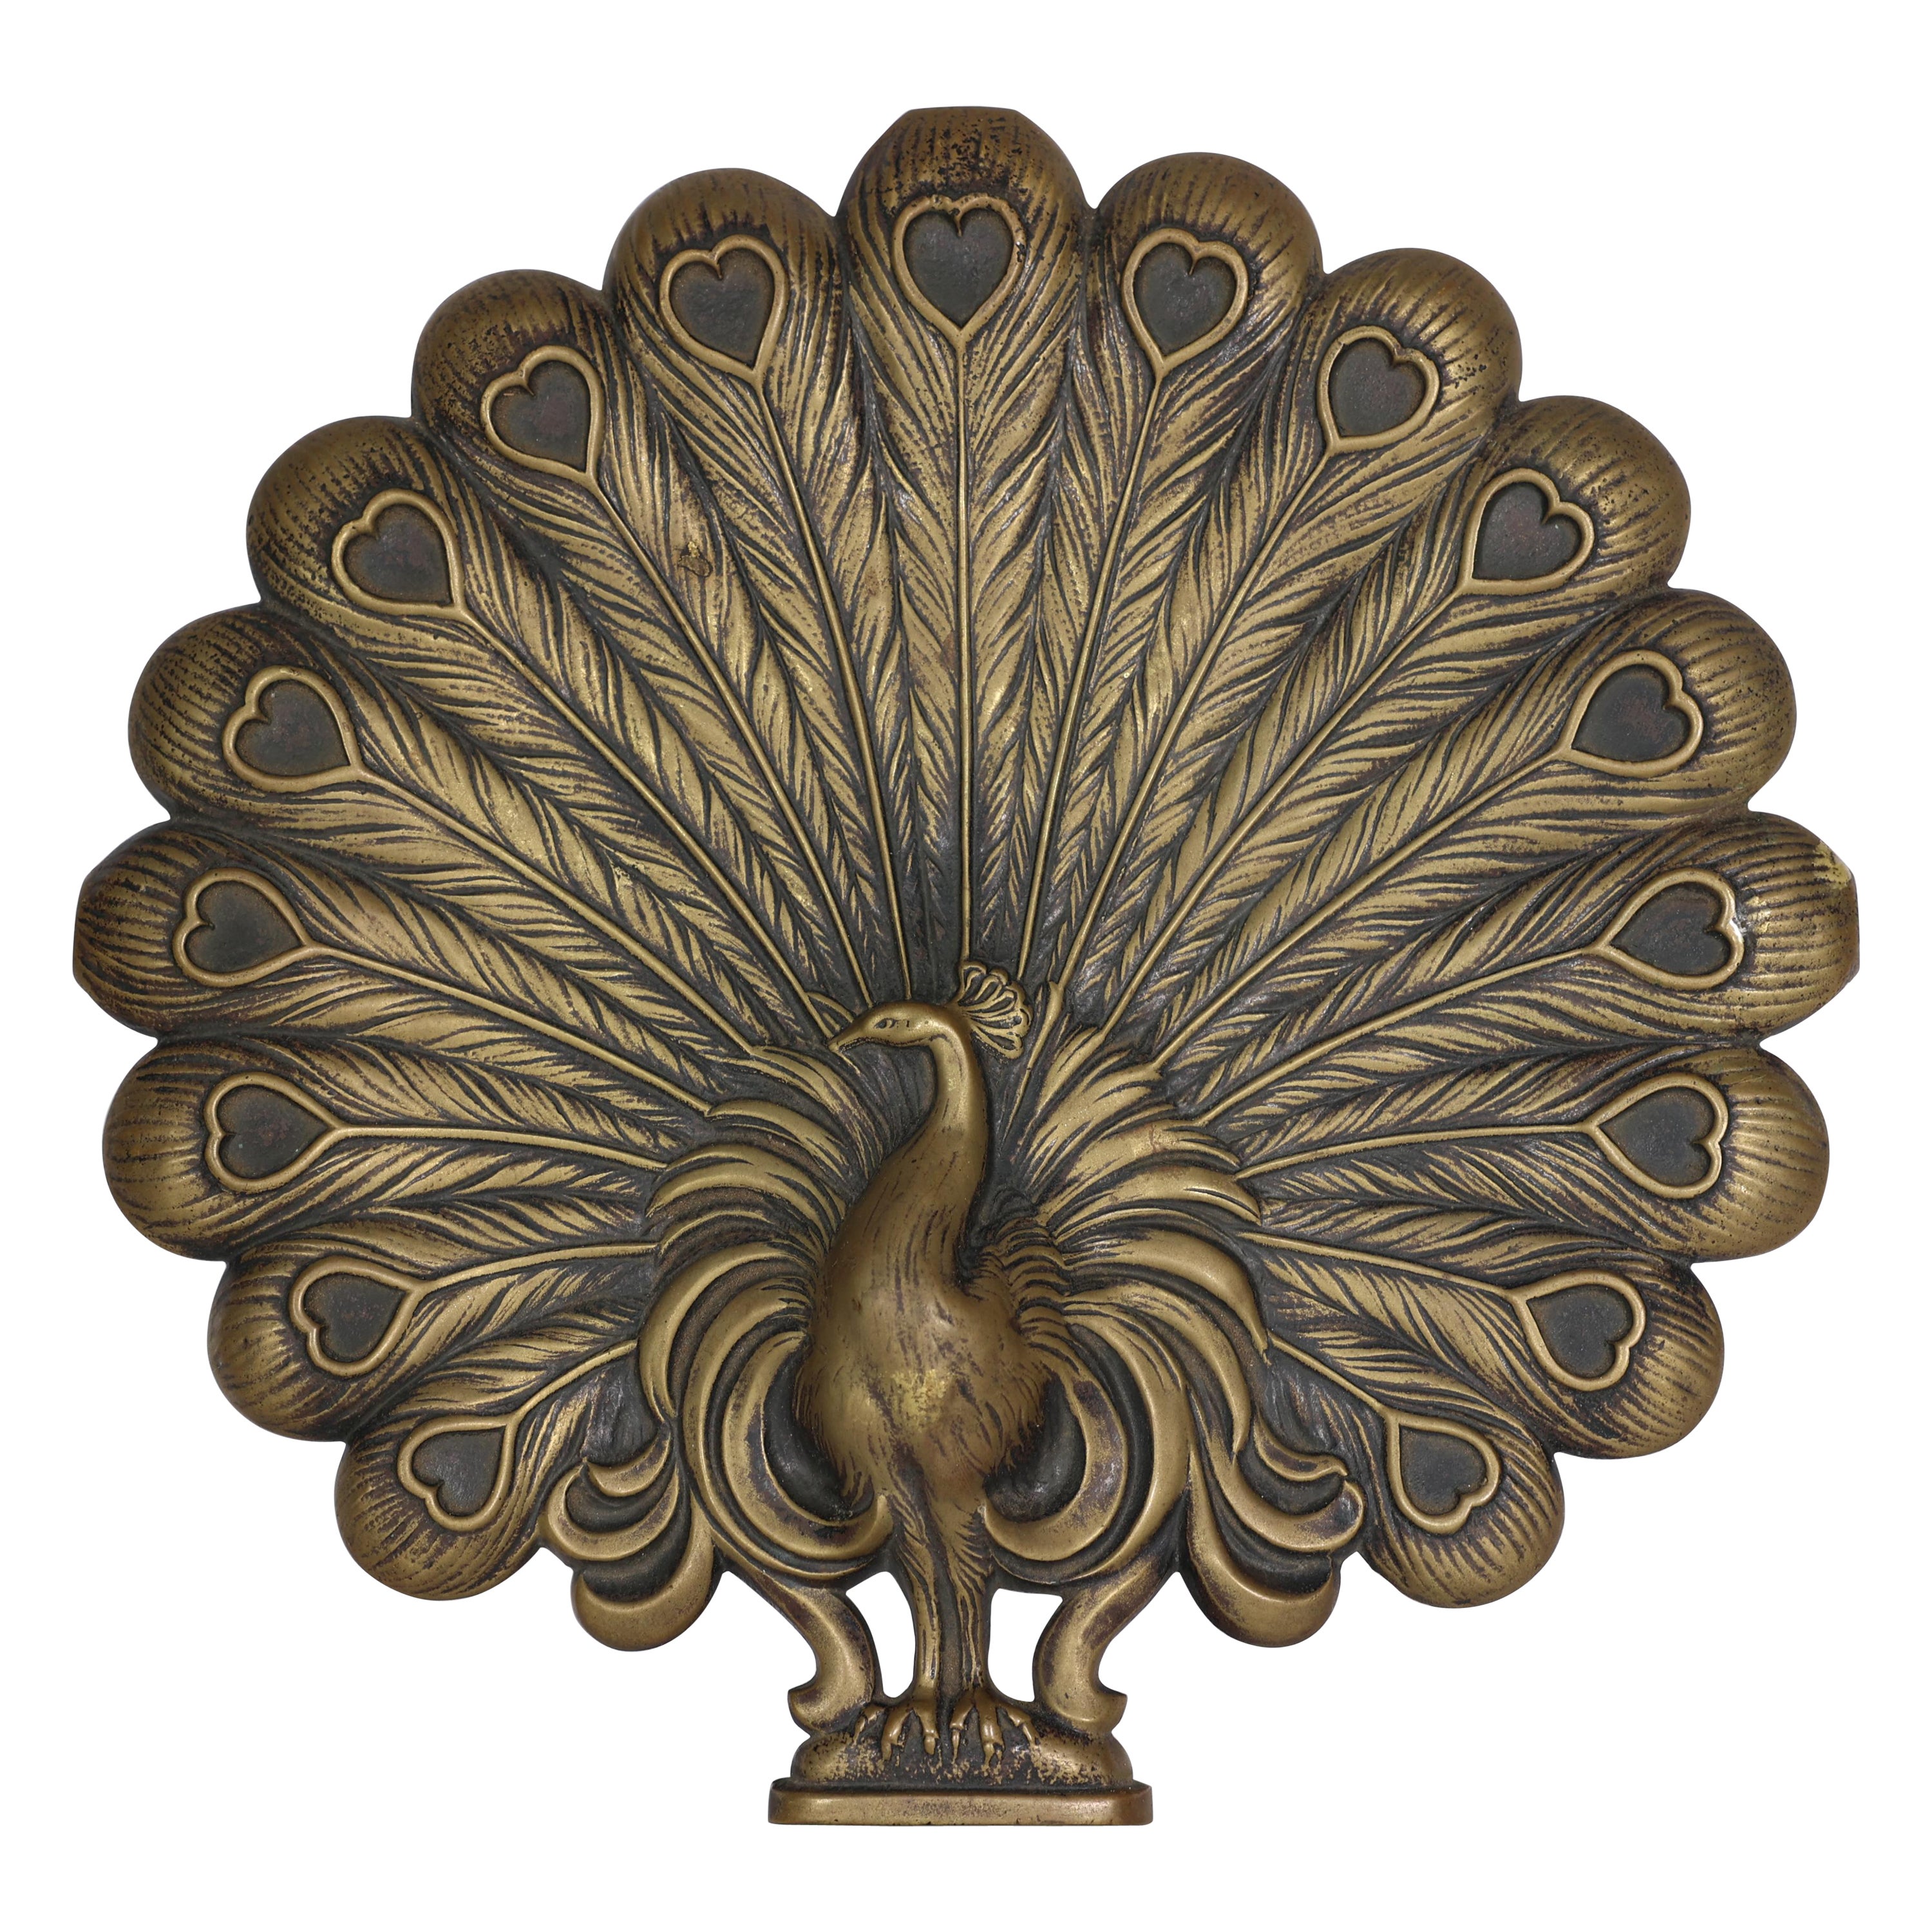 An Aesthetic Movement heavy cast brass peacock trivet with fine detailing